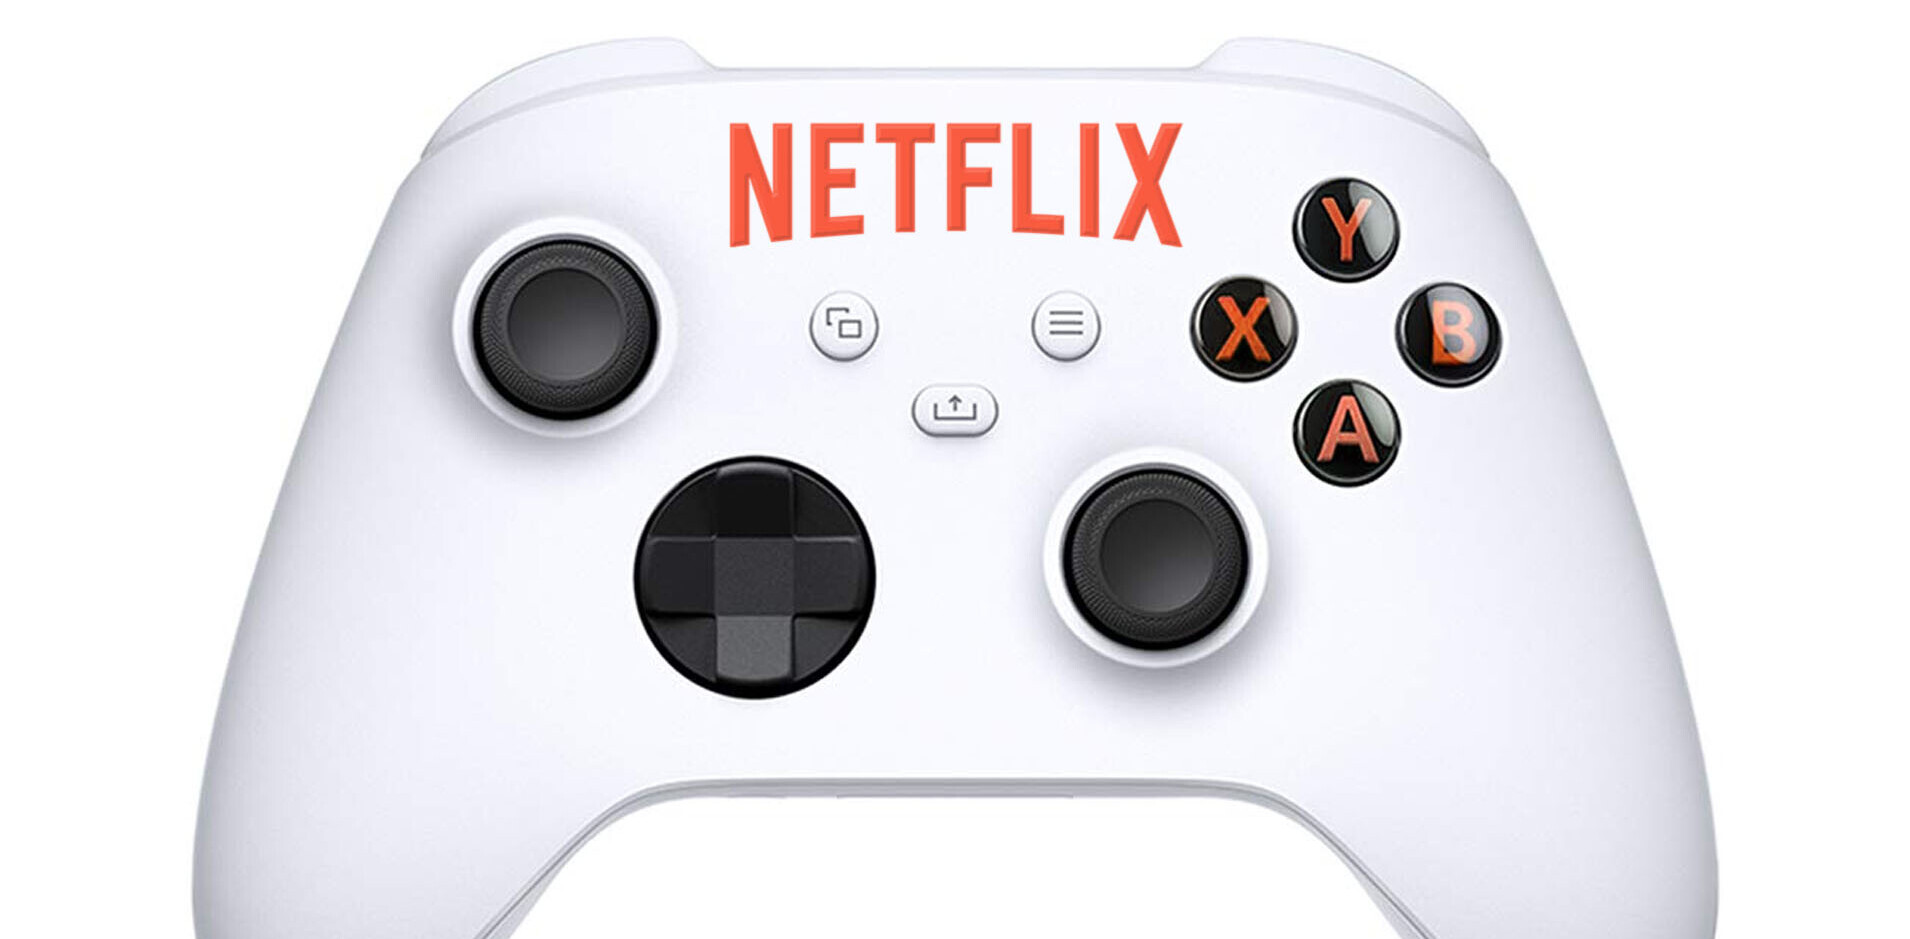 Netflix might bring playable games to your screens next year